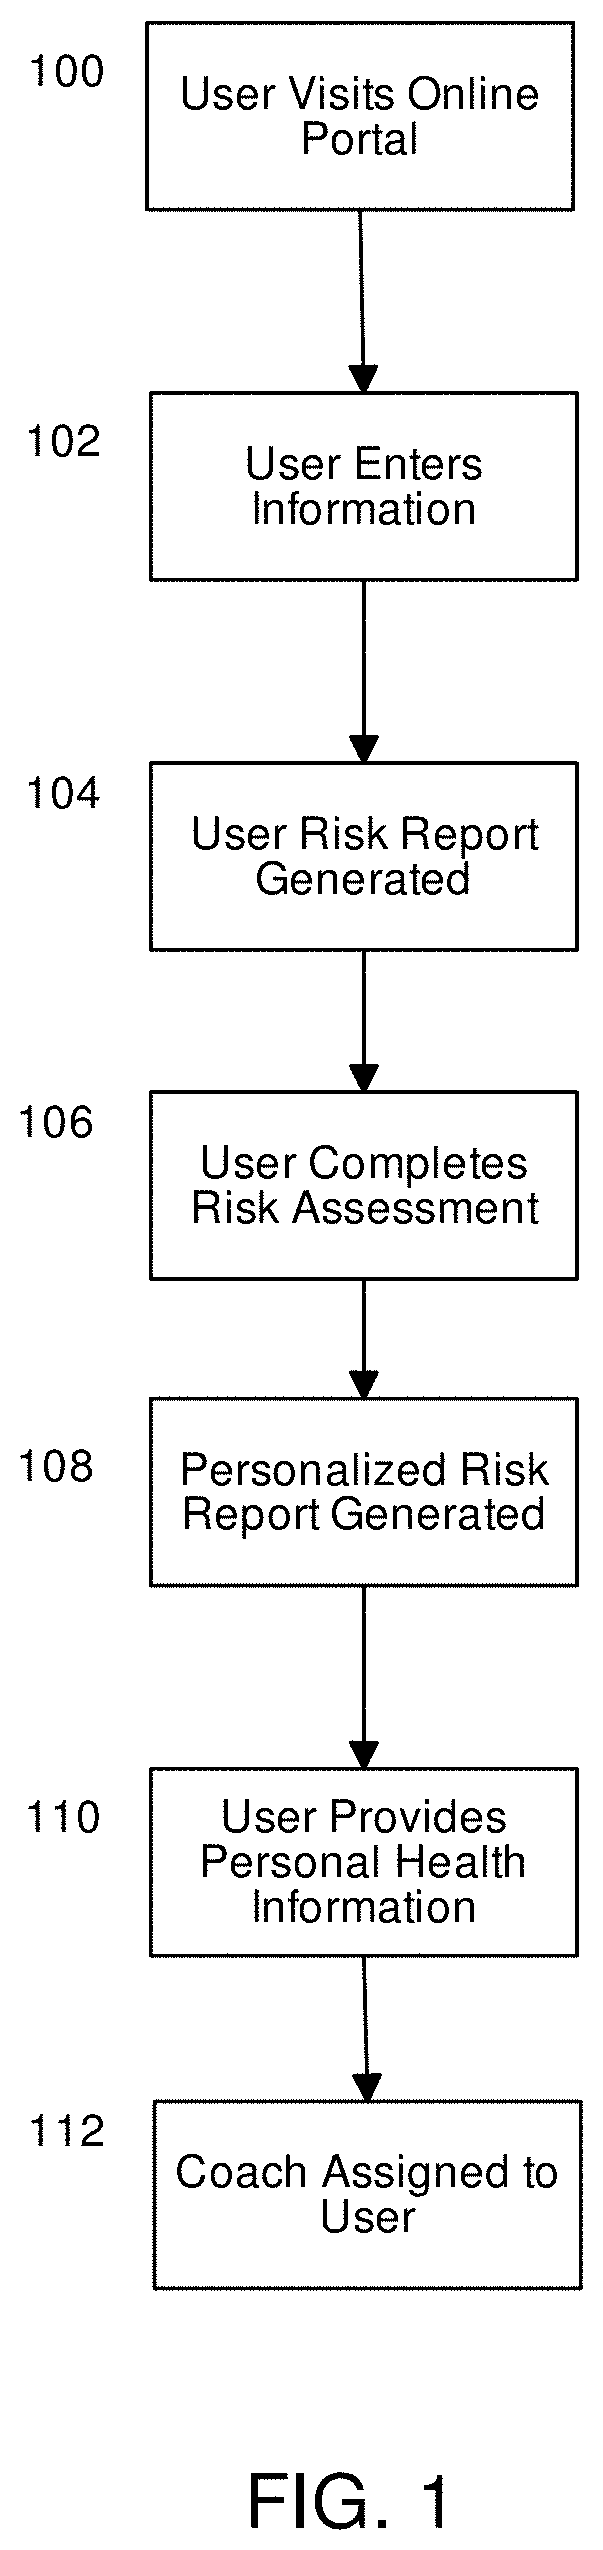 System and method for personalized wellness management using machine learning and artificial intelligence techniques